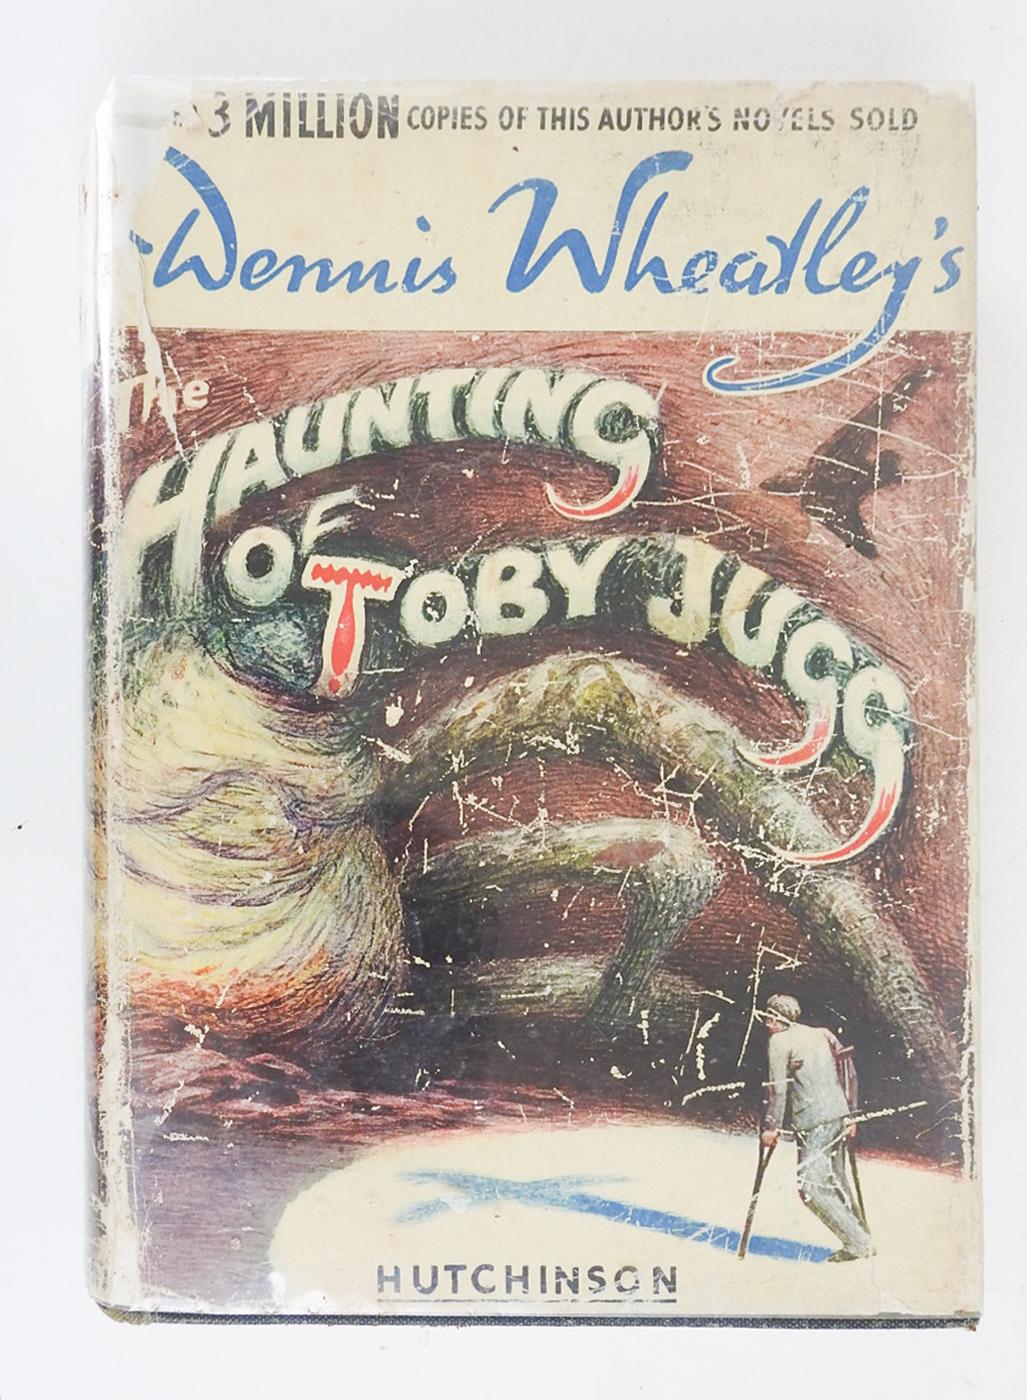 The Haunting of Toby Jugg by Dennis Wheatley.  Published by Hutchinson & Co. (Publishers) Ltd., London., 1948.  Black cloth hardcover binding, illustrated dust jacket, edge wear, tears, losses to dust jacket.